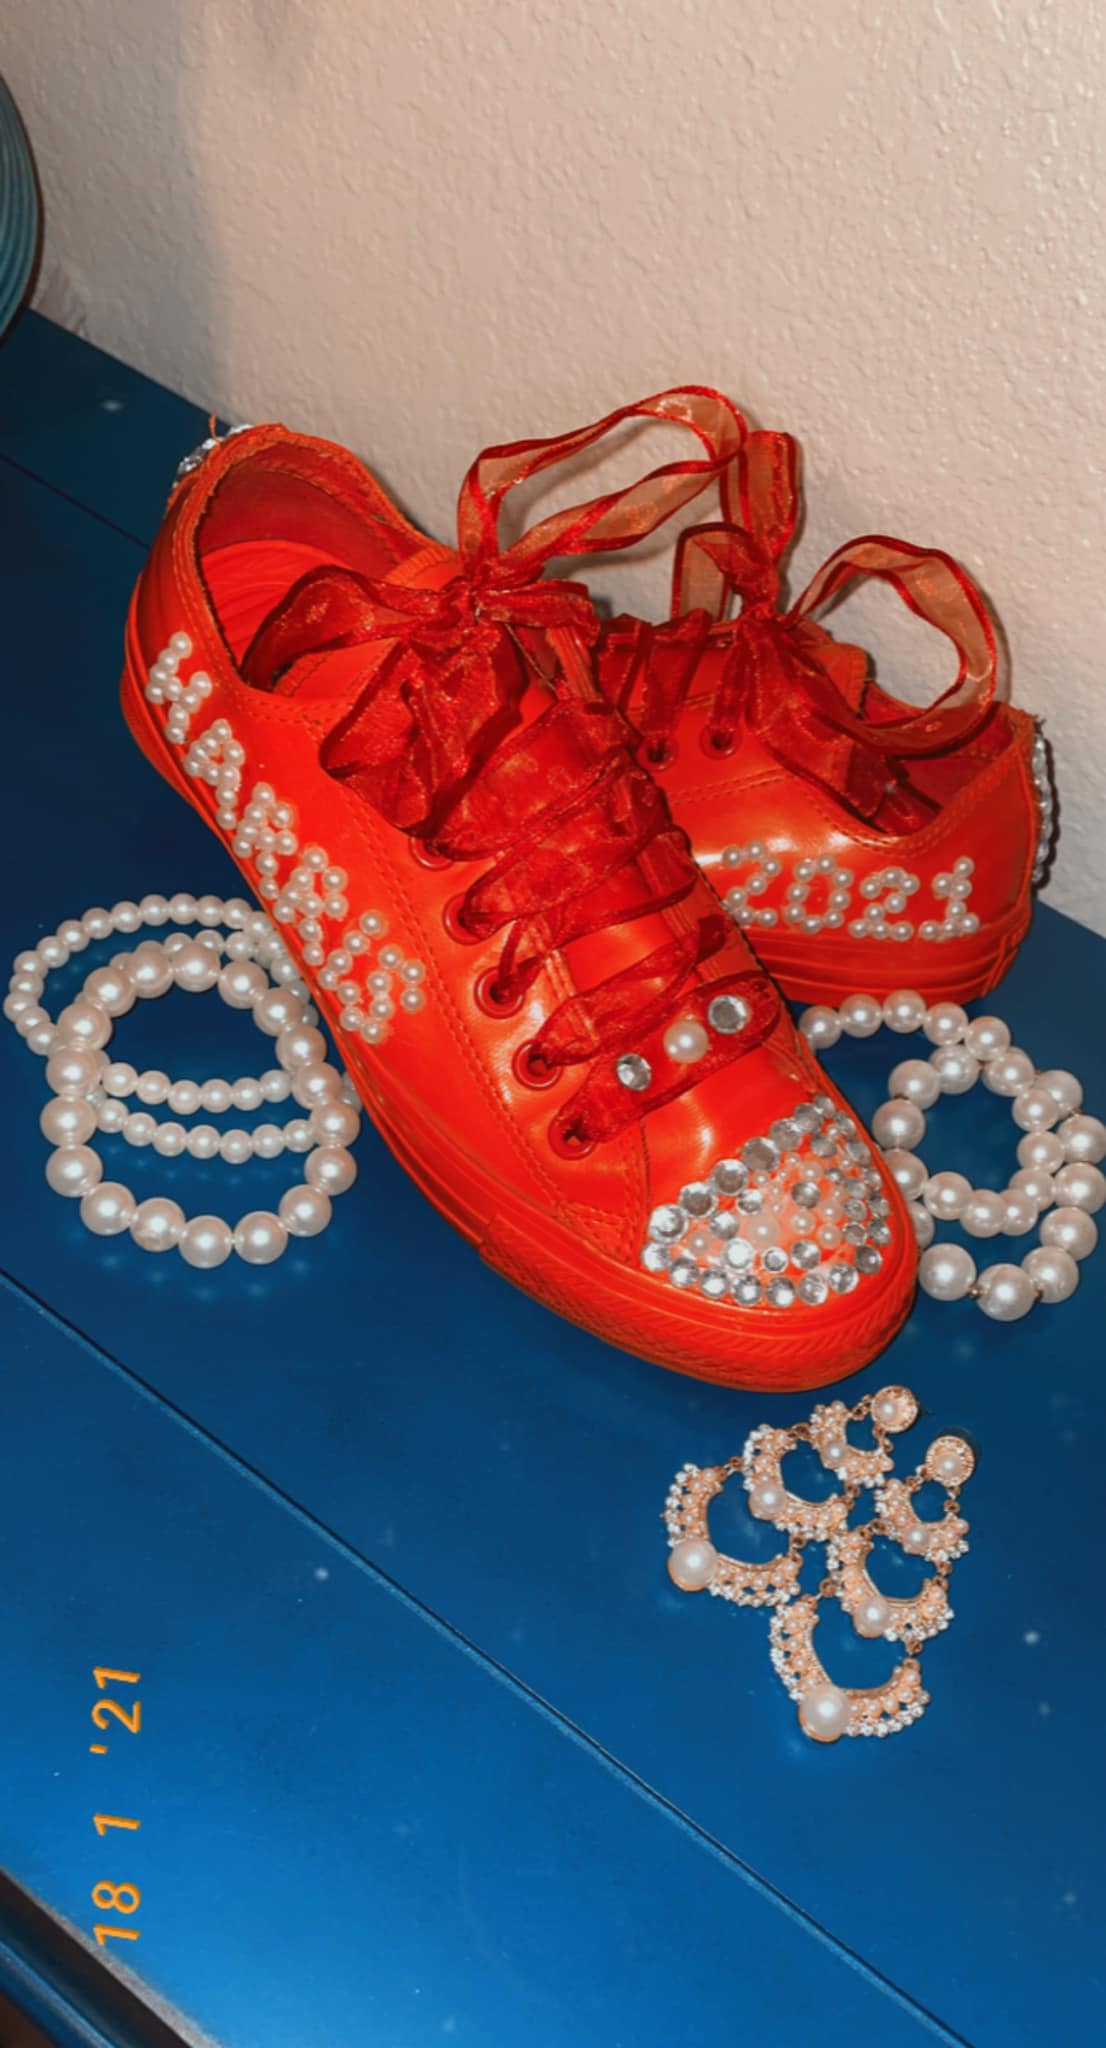 This member used pearls to spell out Harris' name on her red chucks. (Photo: Cri Jackson)